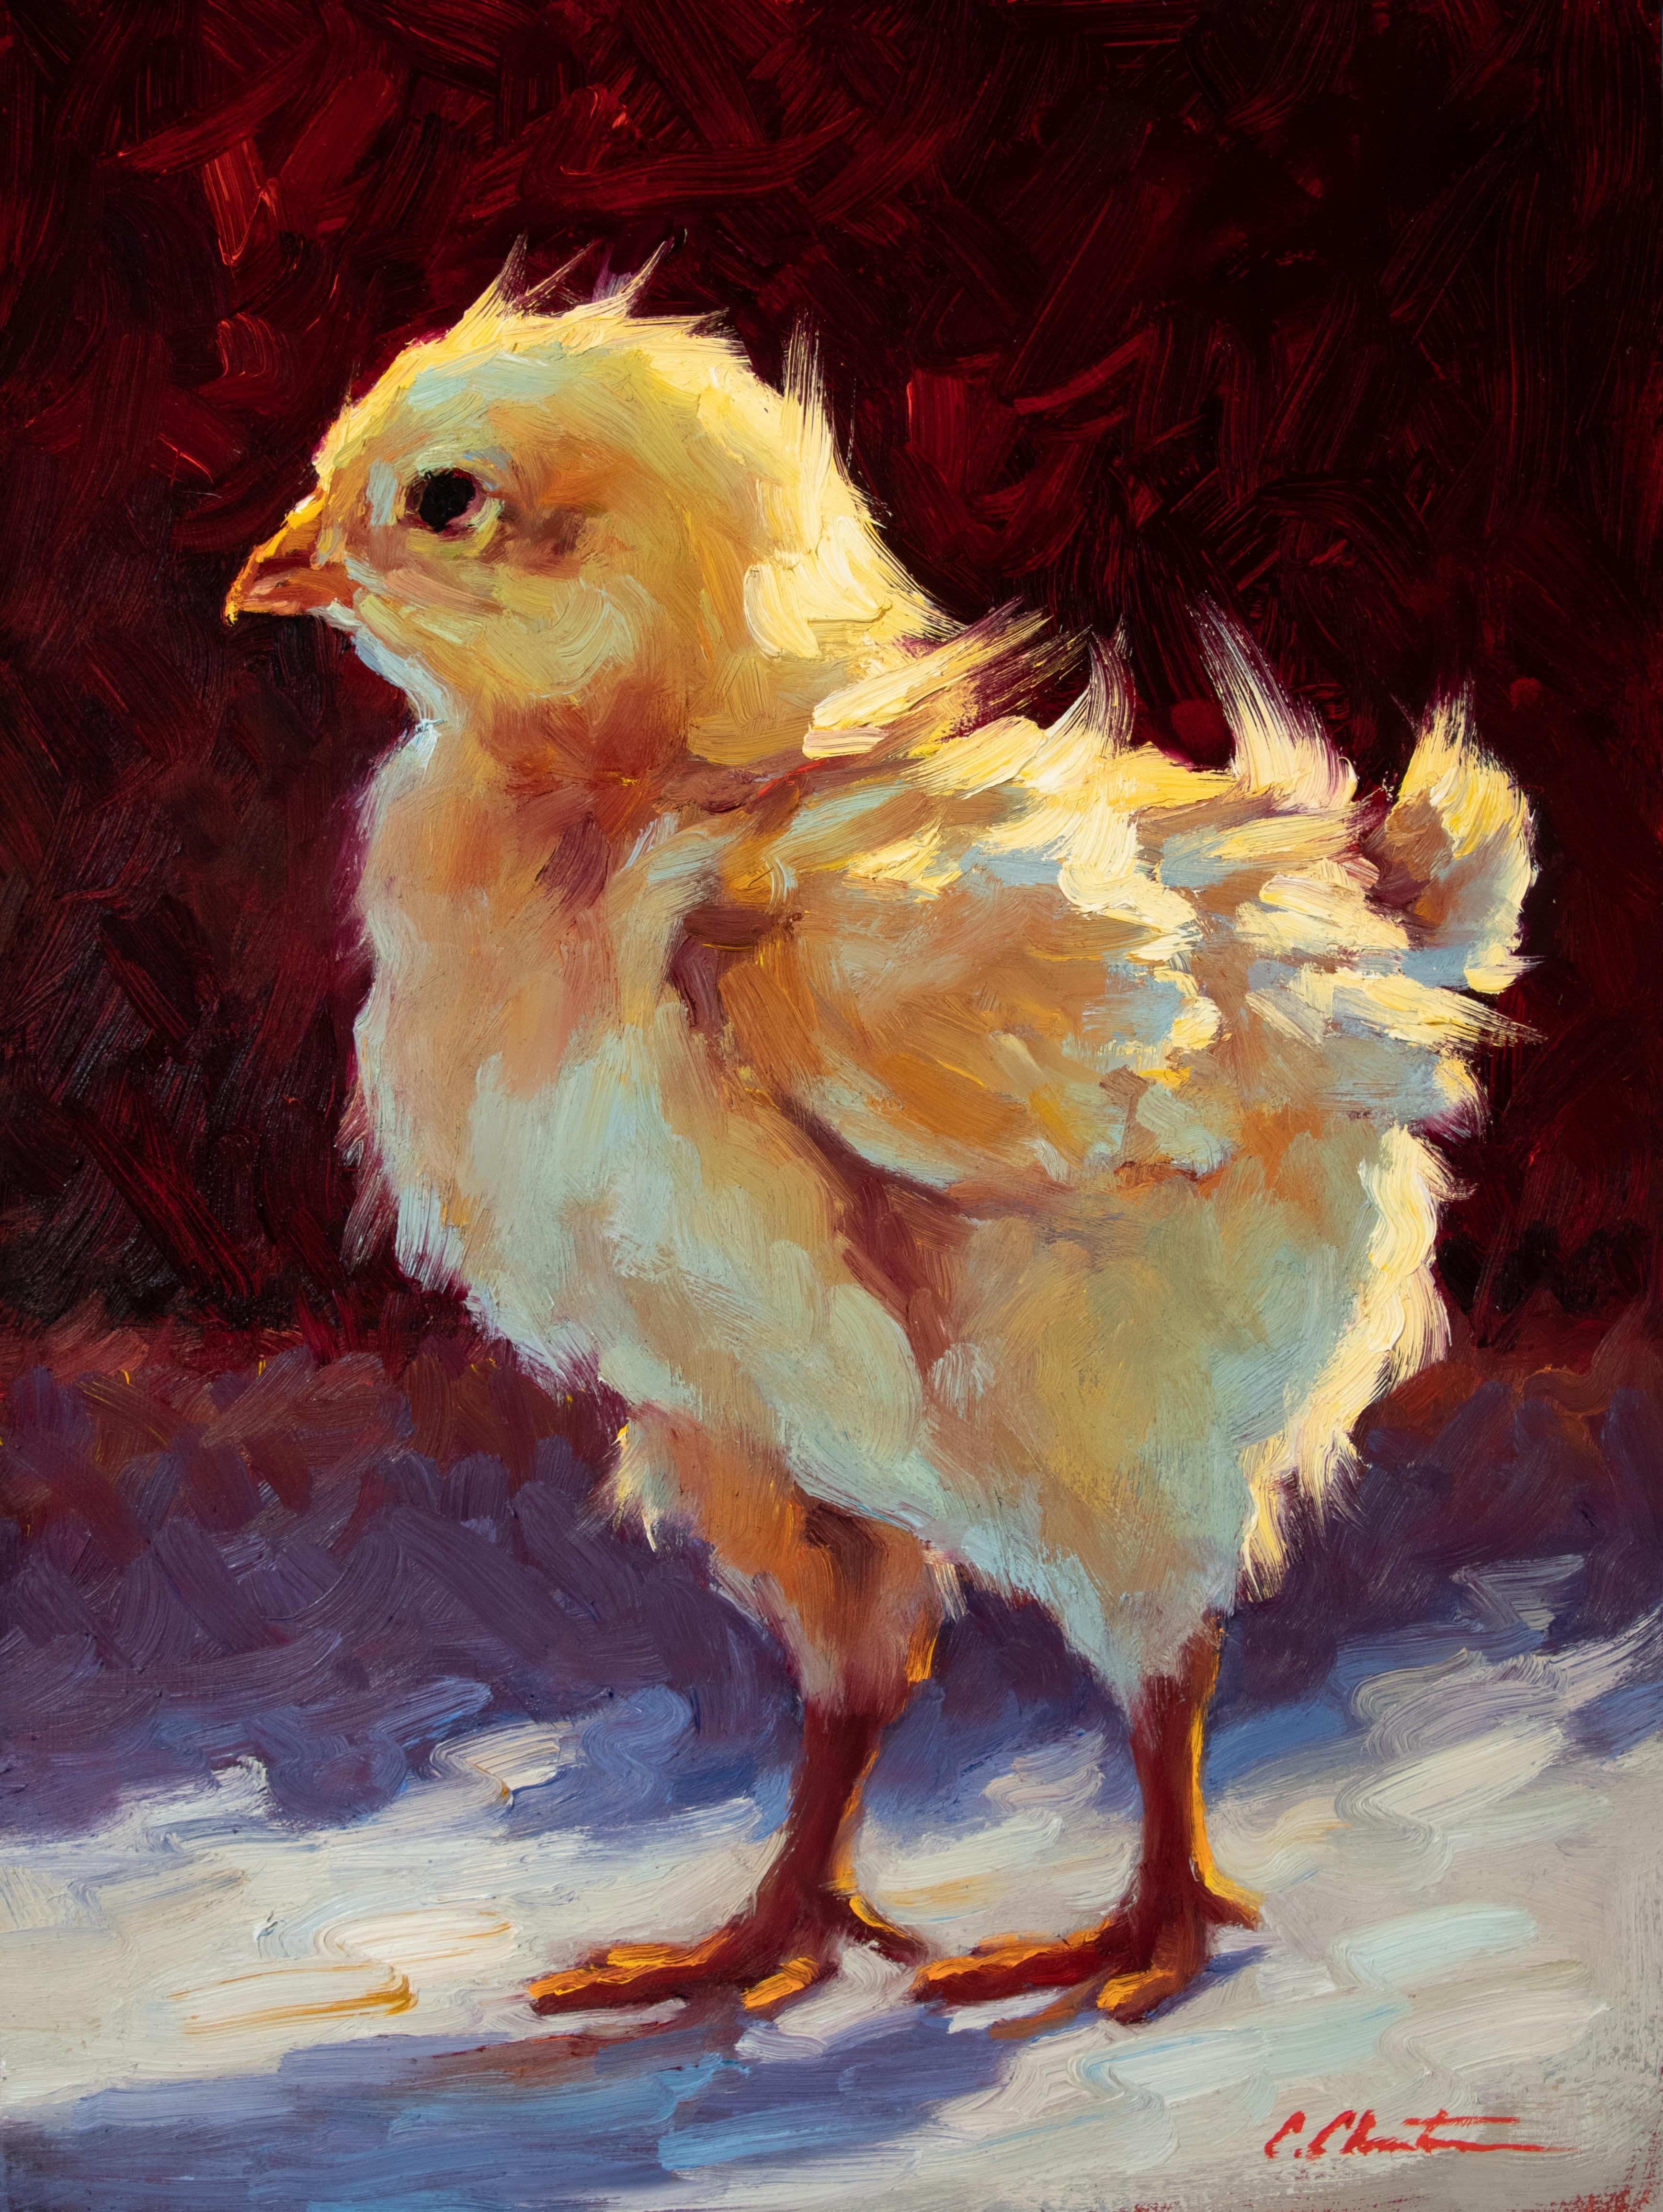 Cheri Christensen Animal Painting - "Determined Chick" oil painting of a yellow baby chicken with backlighting